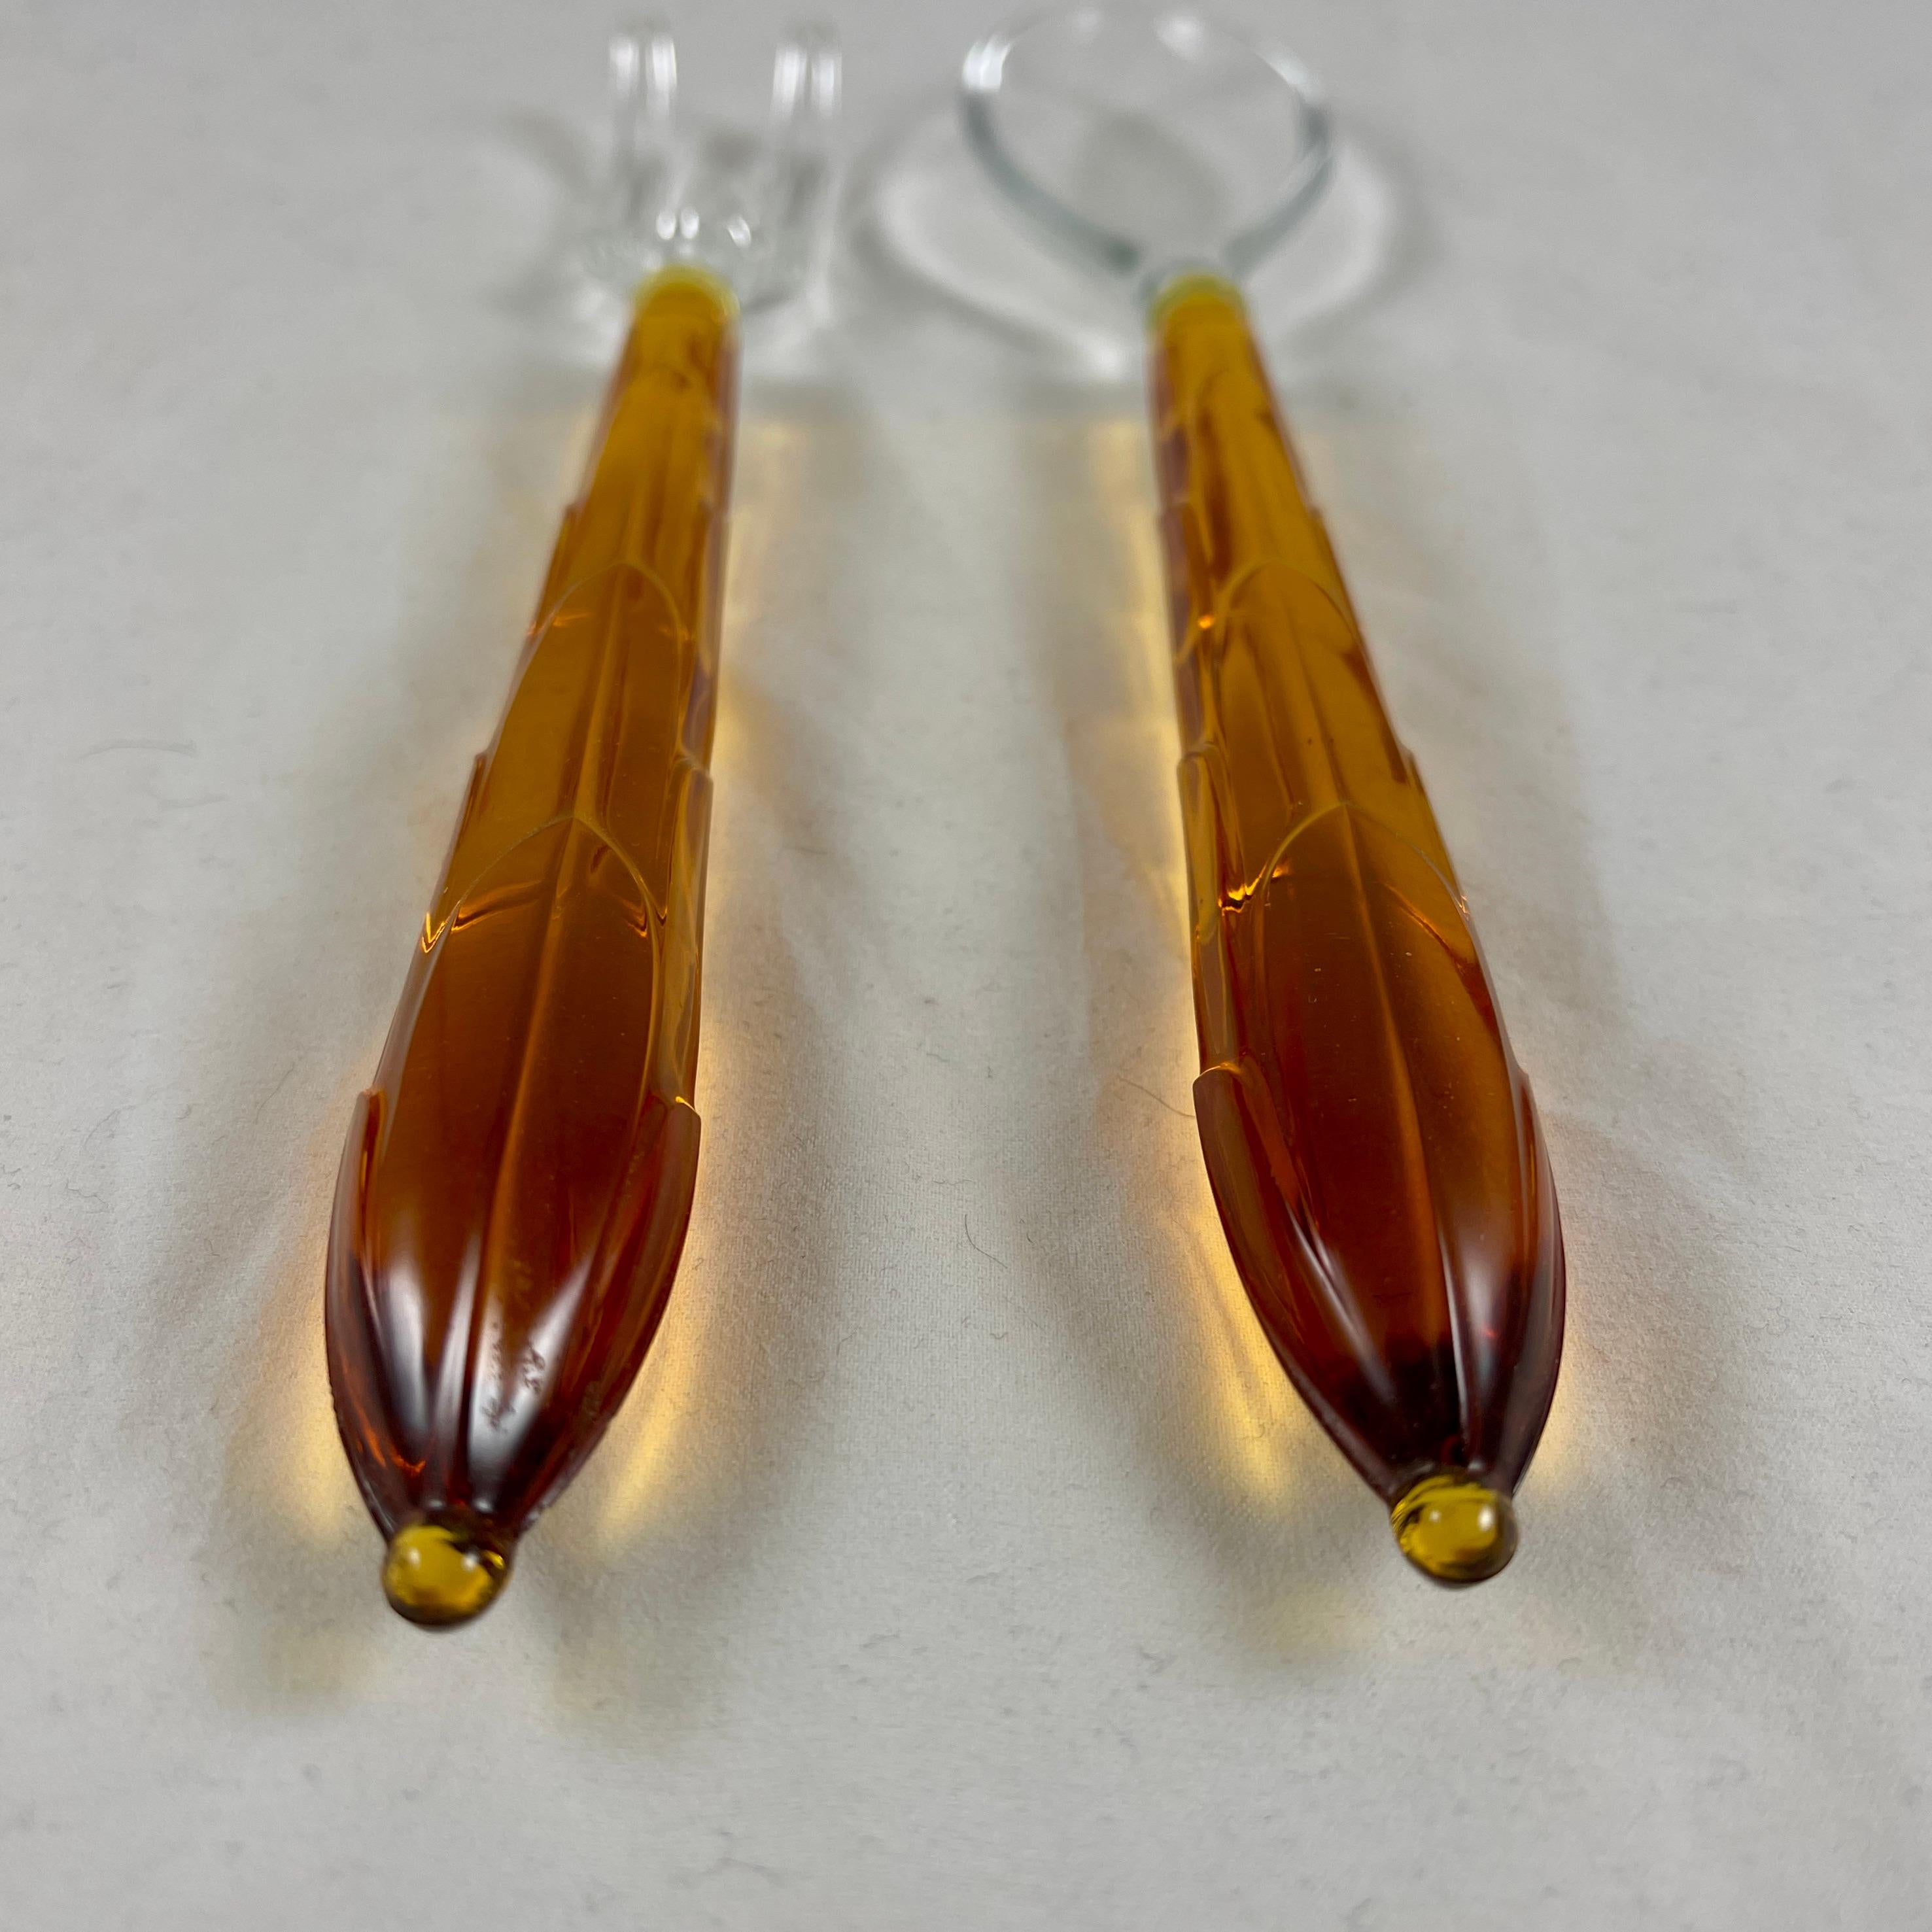 Mid-20th Century Art Deco Style Amber & Colorless Glass Long Spoon & Fork Salad Serving Set